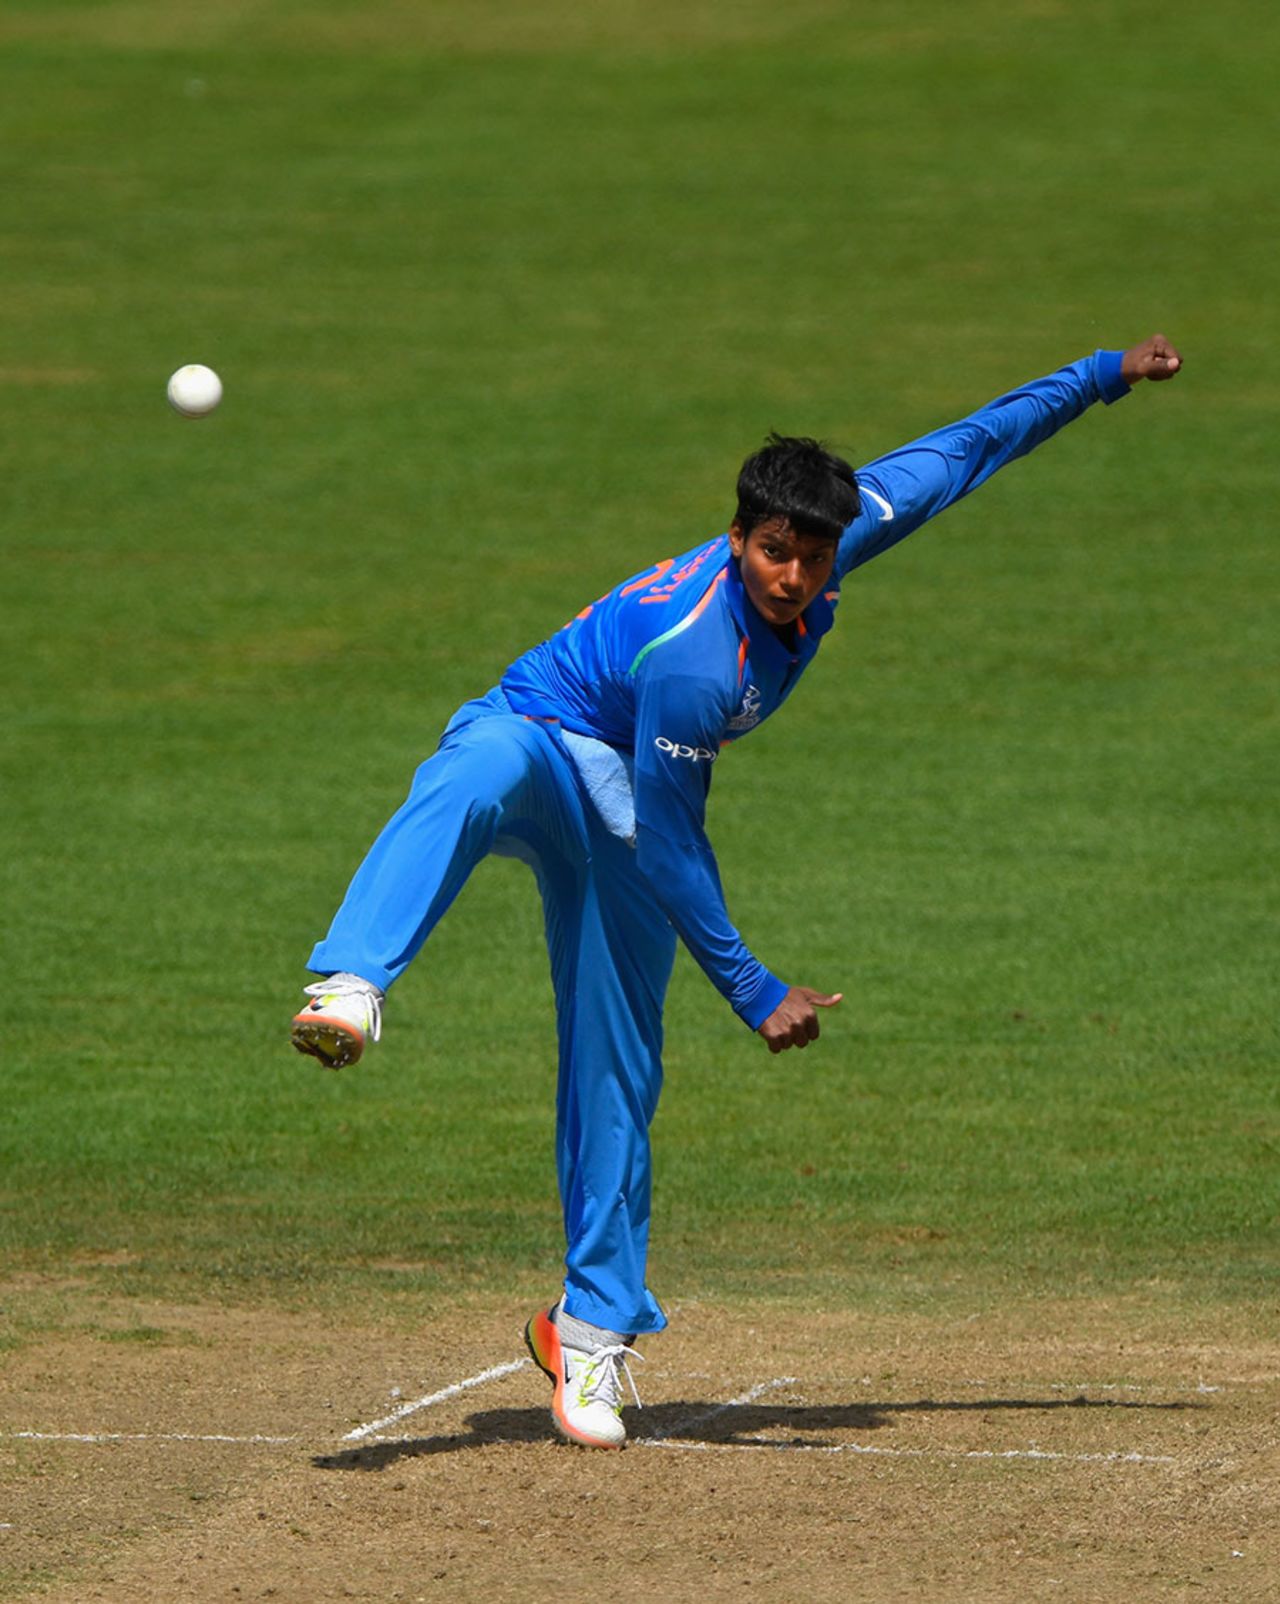 The pitch offered sharp turn for Deepti Sharma, Australia v India, Women's World Cup, Bristol, July 12, 2017